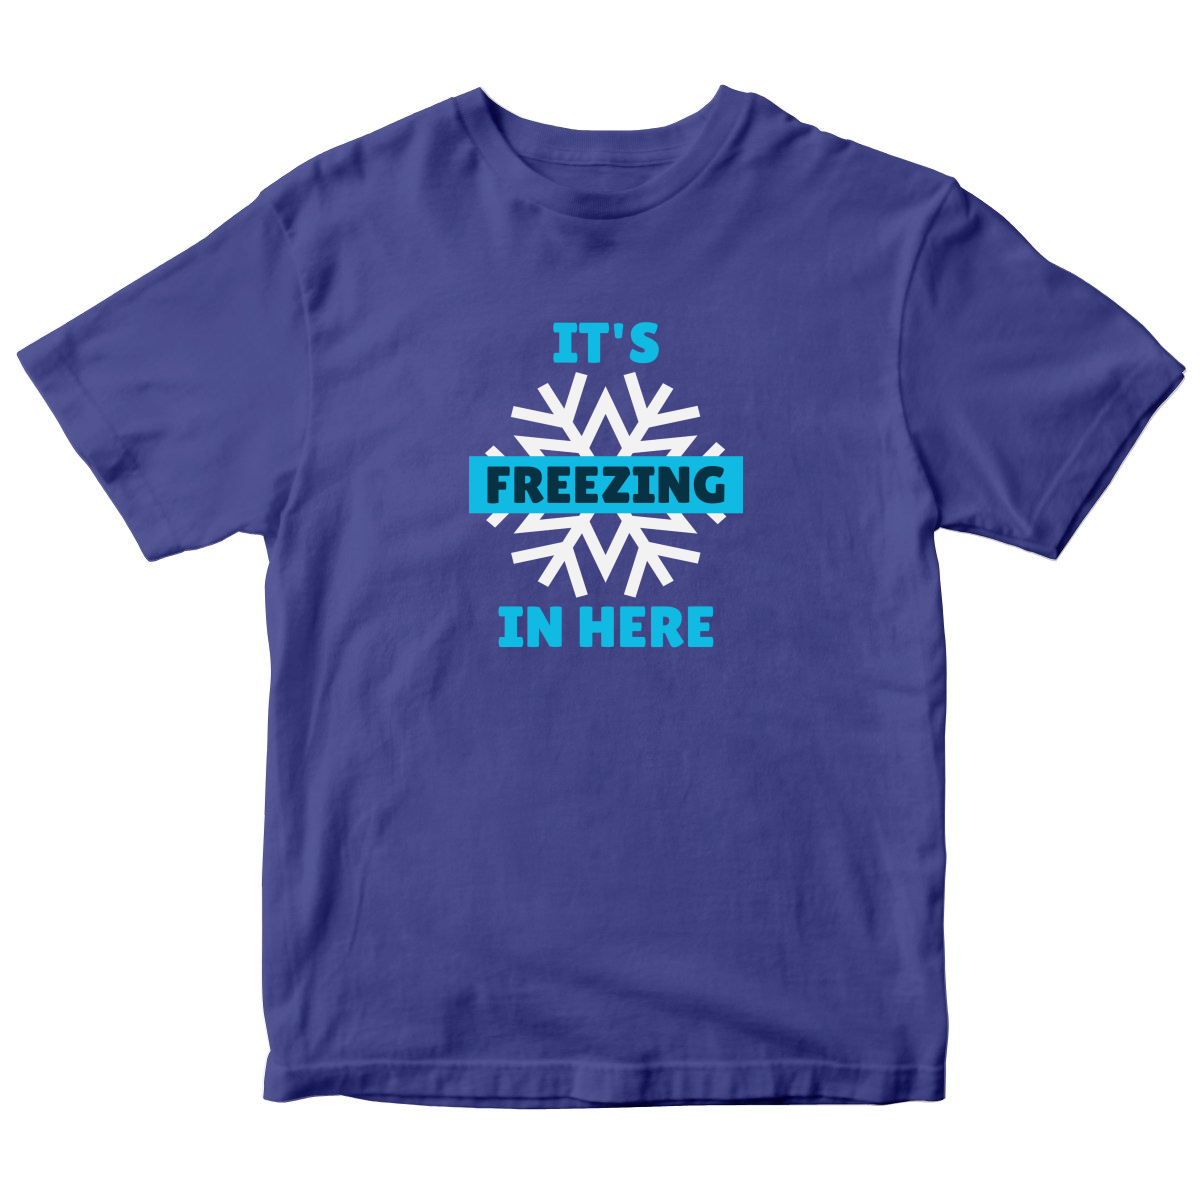 It's Freezing In Here! Kids T-shirt | Blue